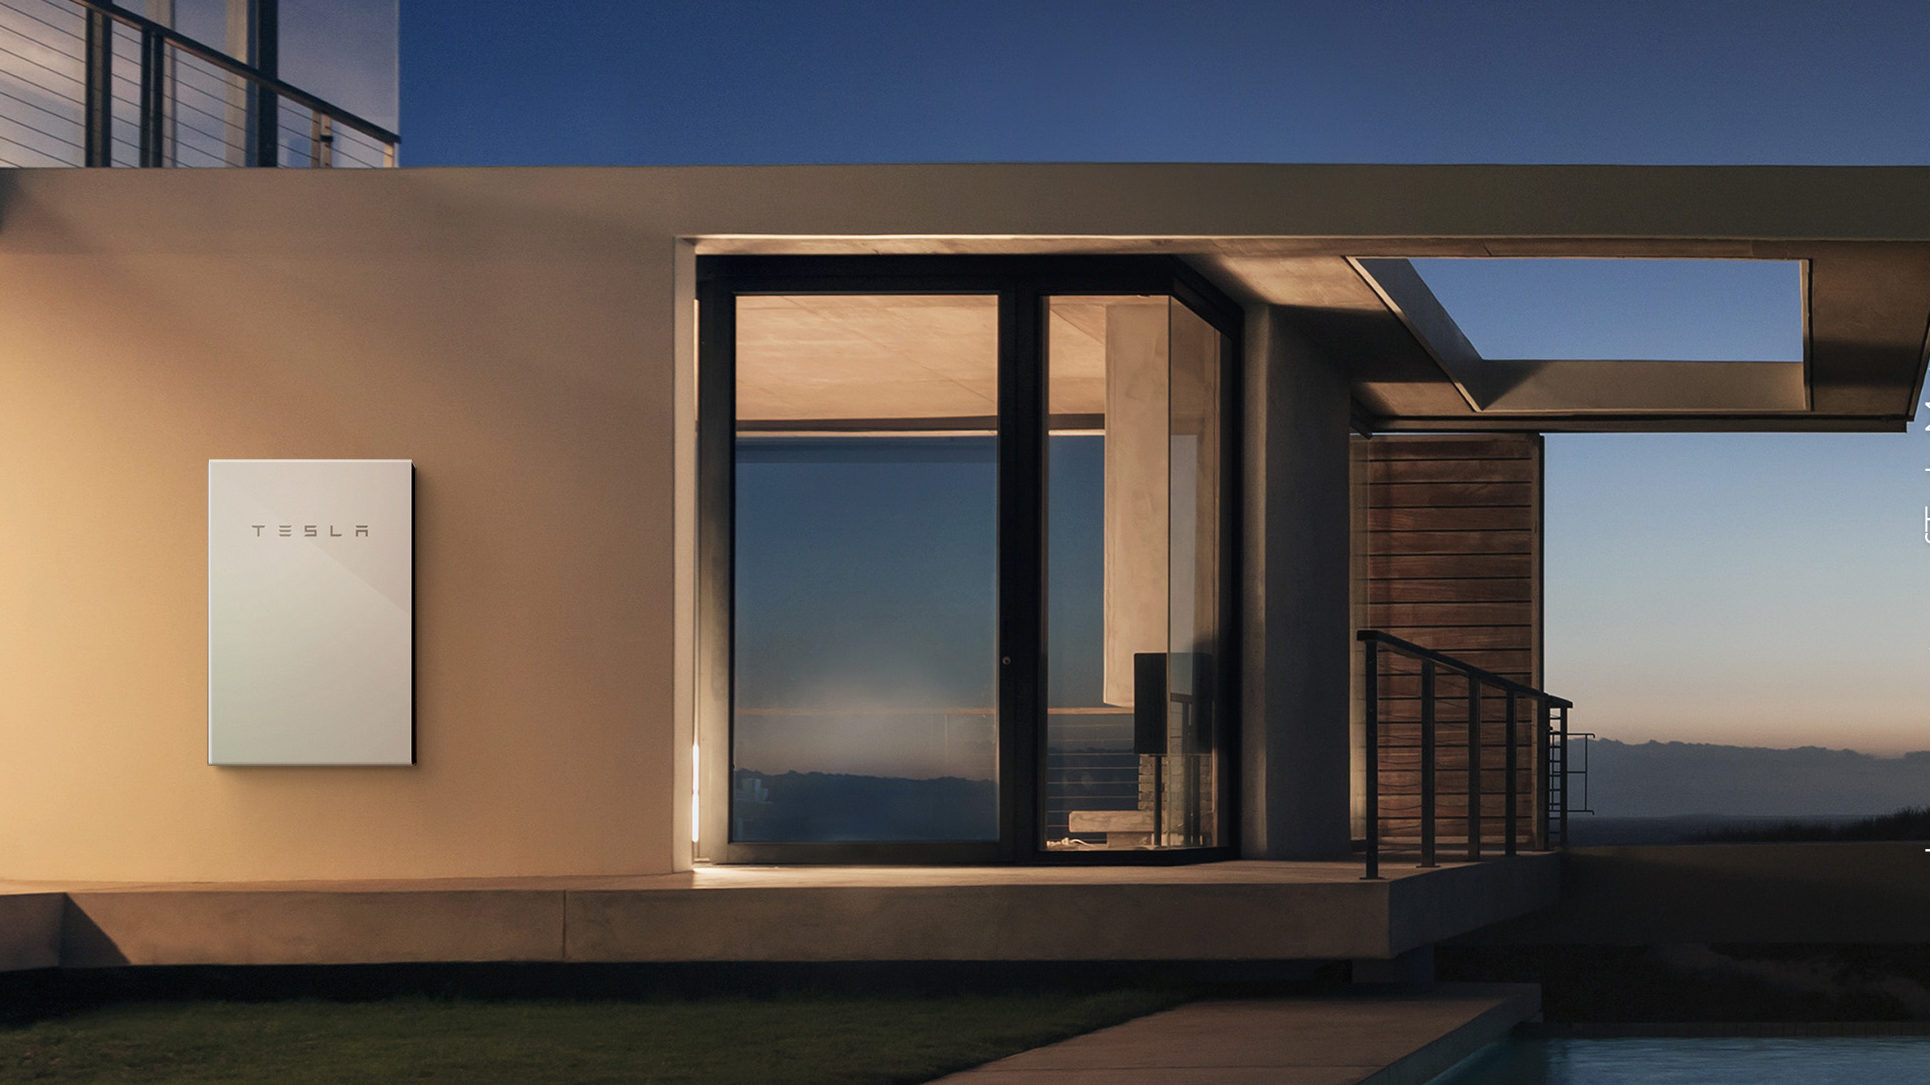 The Tesla Powerwall is one example of an energy storage system that an be used with many solar photovoltaic systems. Image: Tesla.